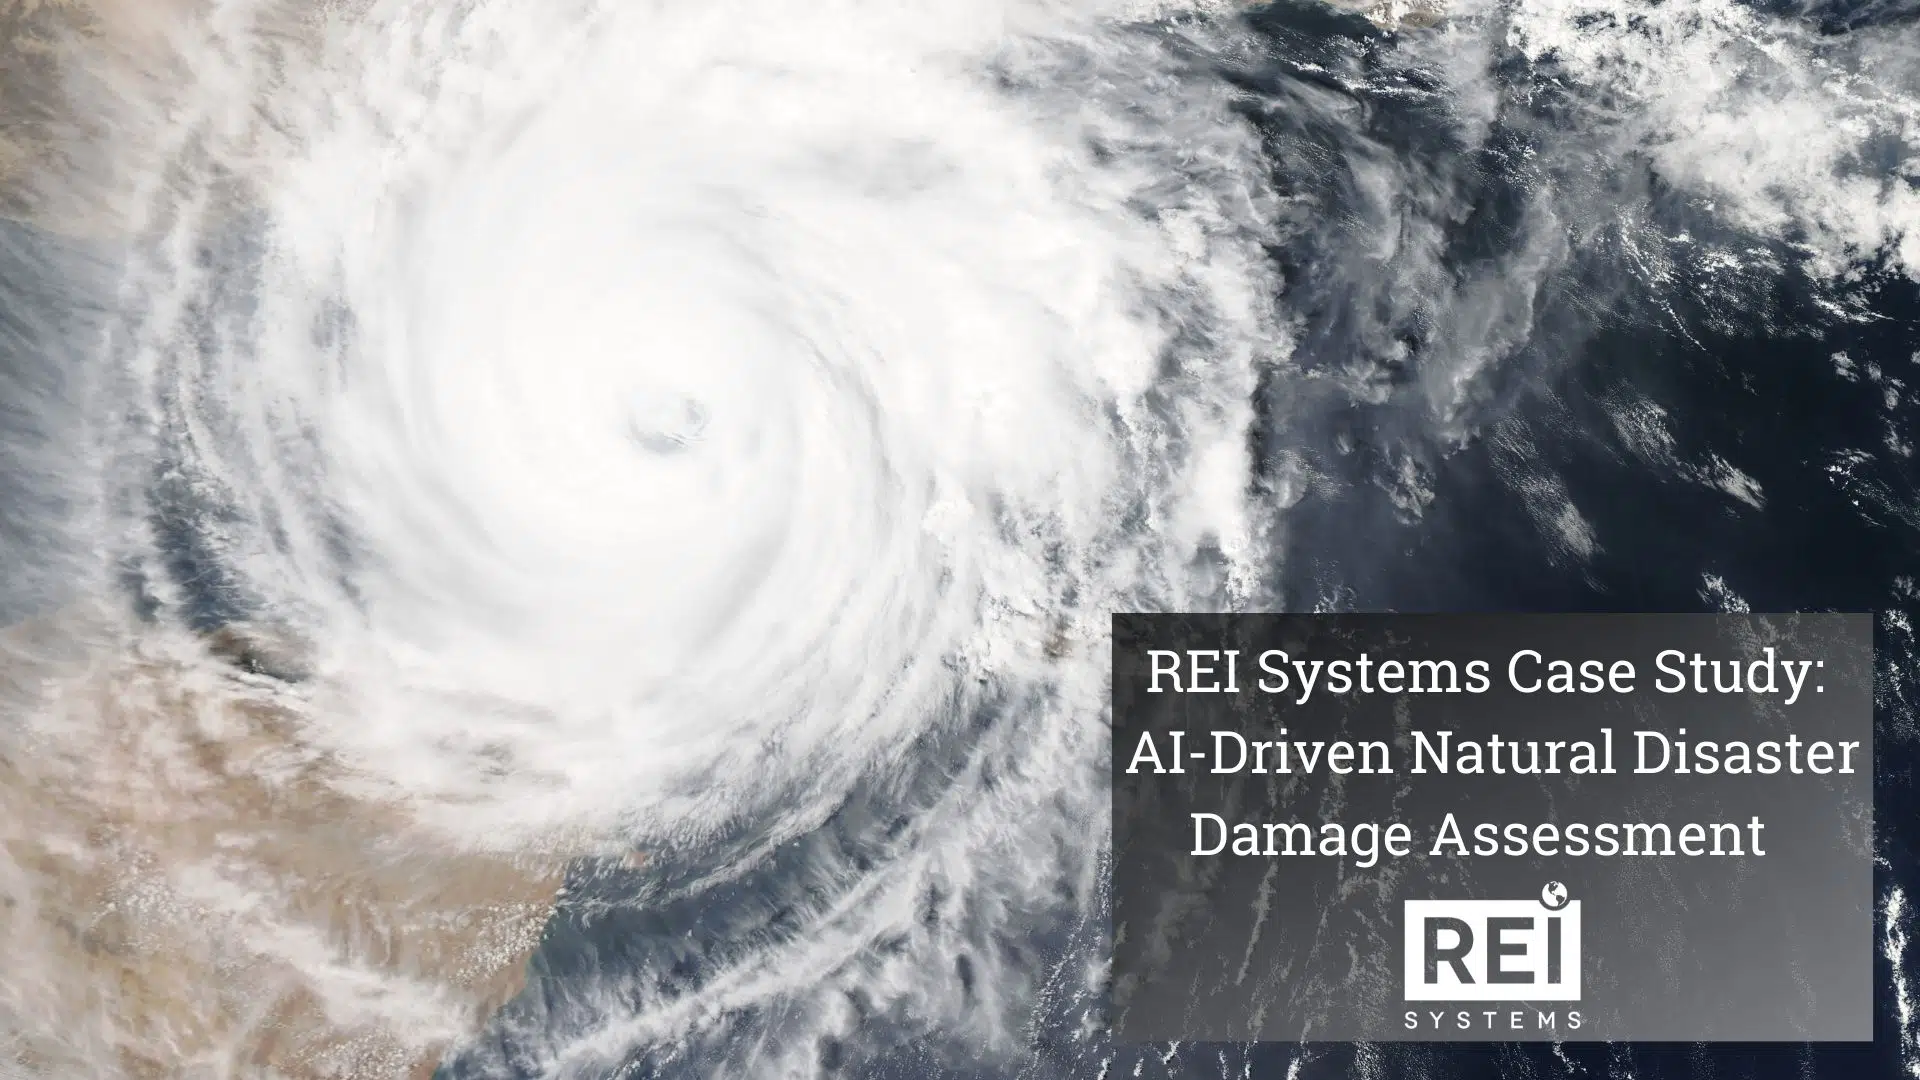 Blog REI to Present Natural Disaster Damage Assessment Case Study